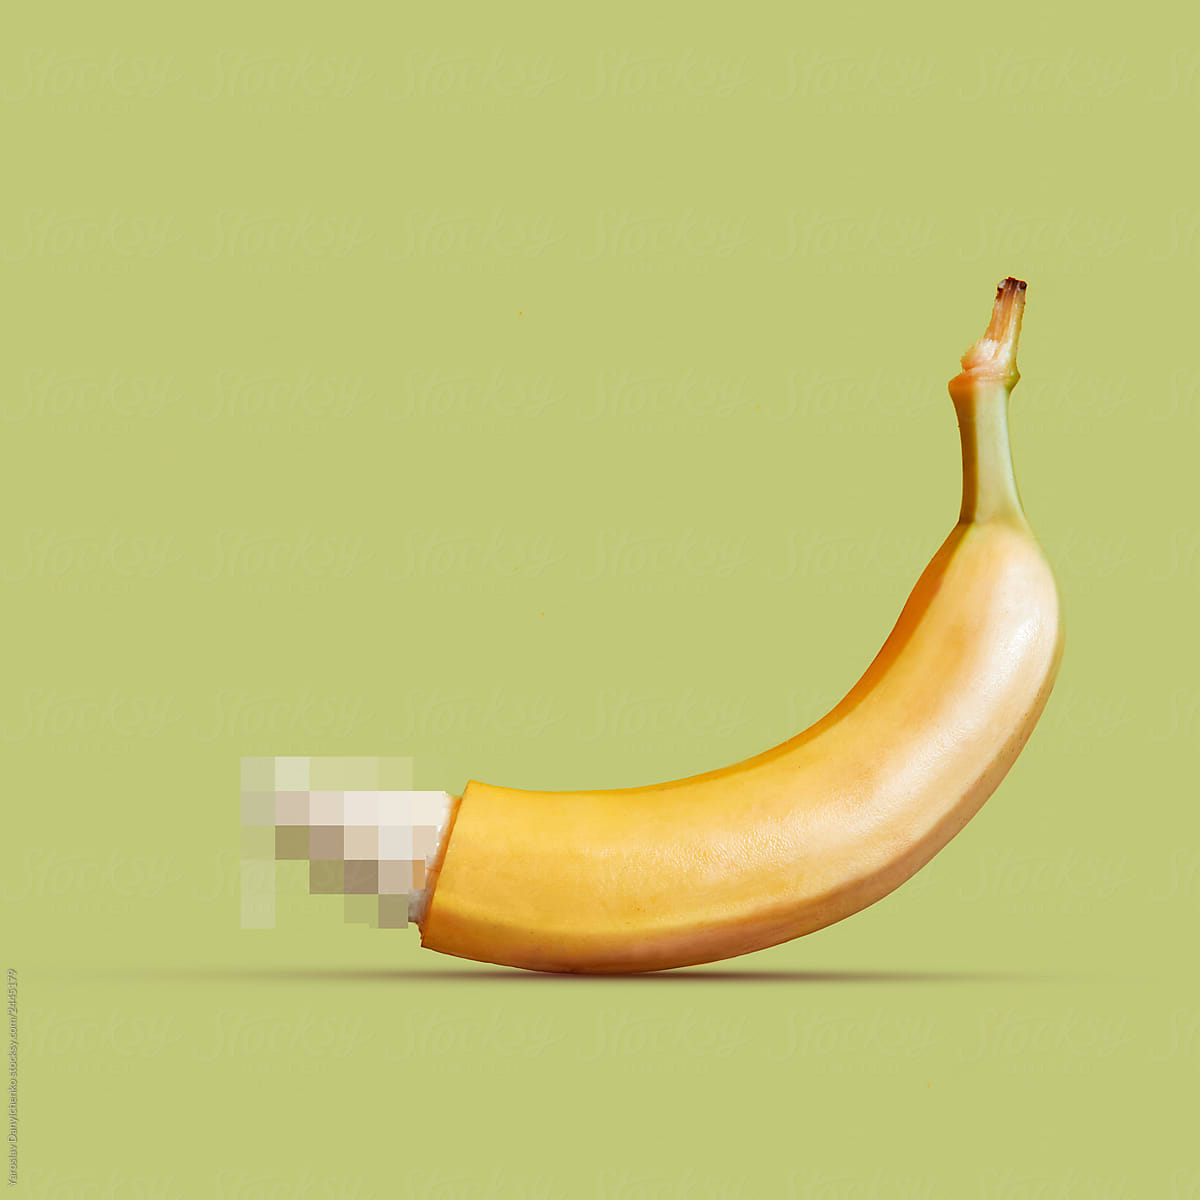 Large banana as a symbol of the penis on a yellow background. by Yaroslav D...